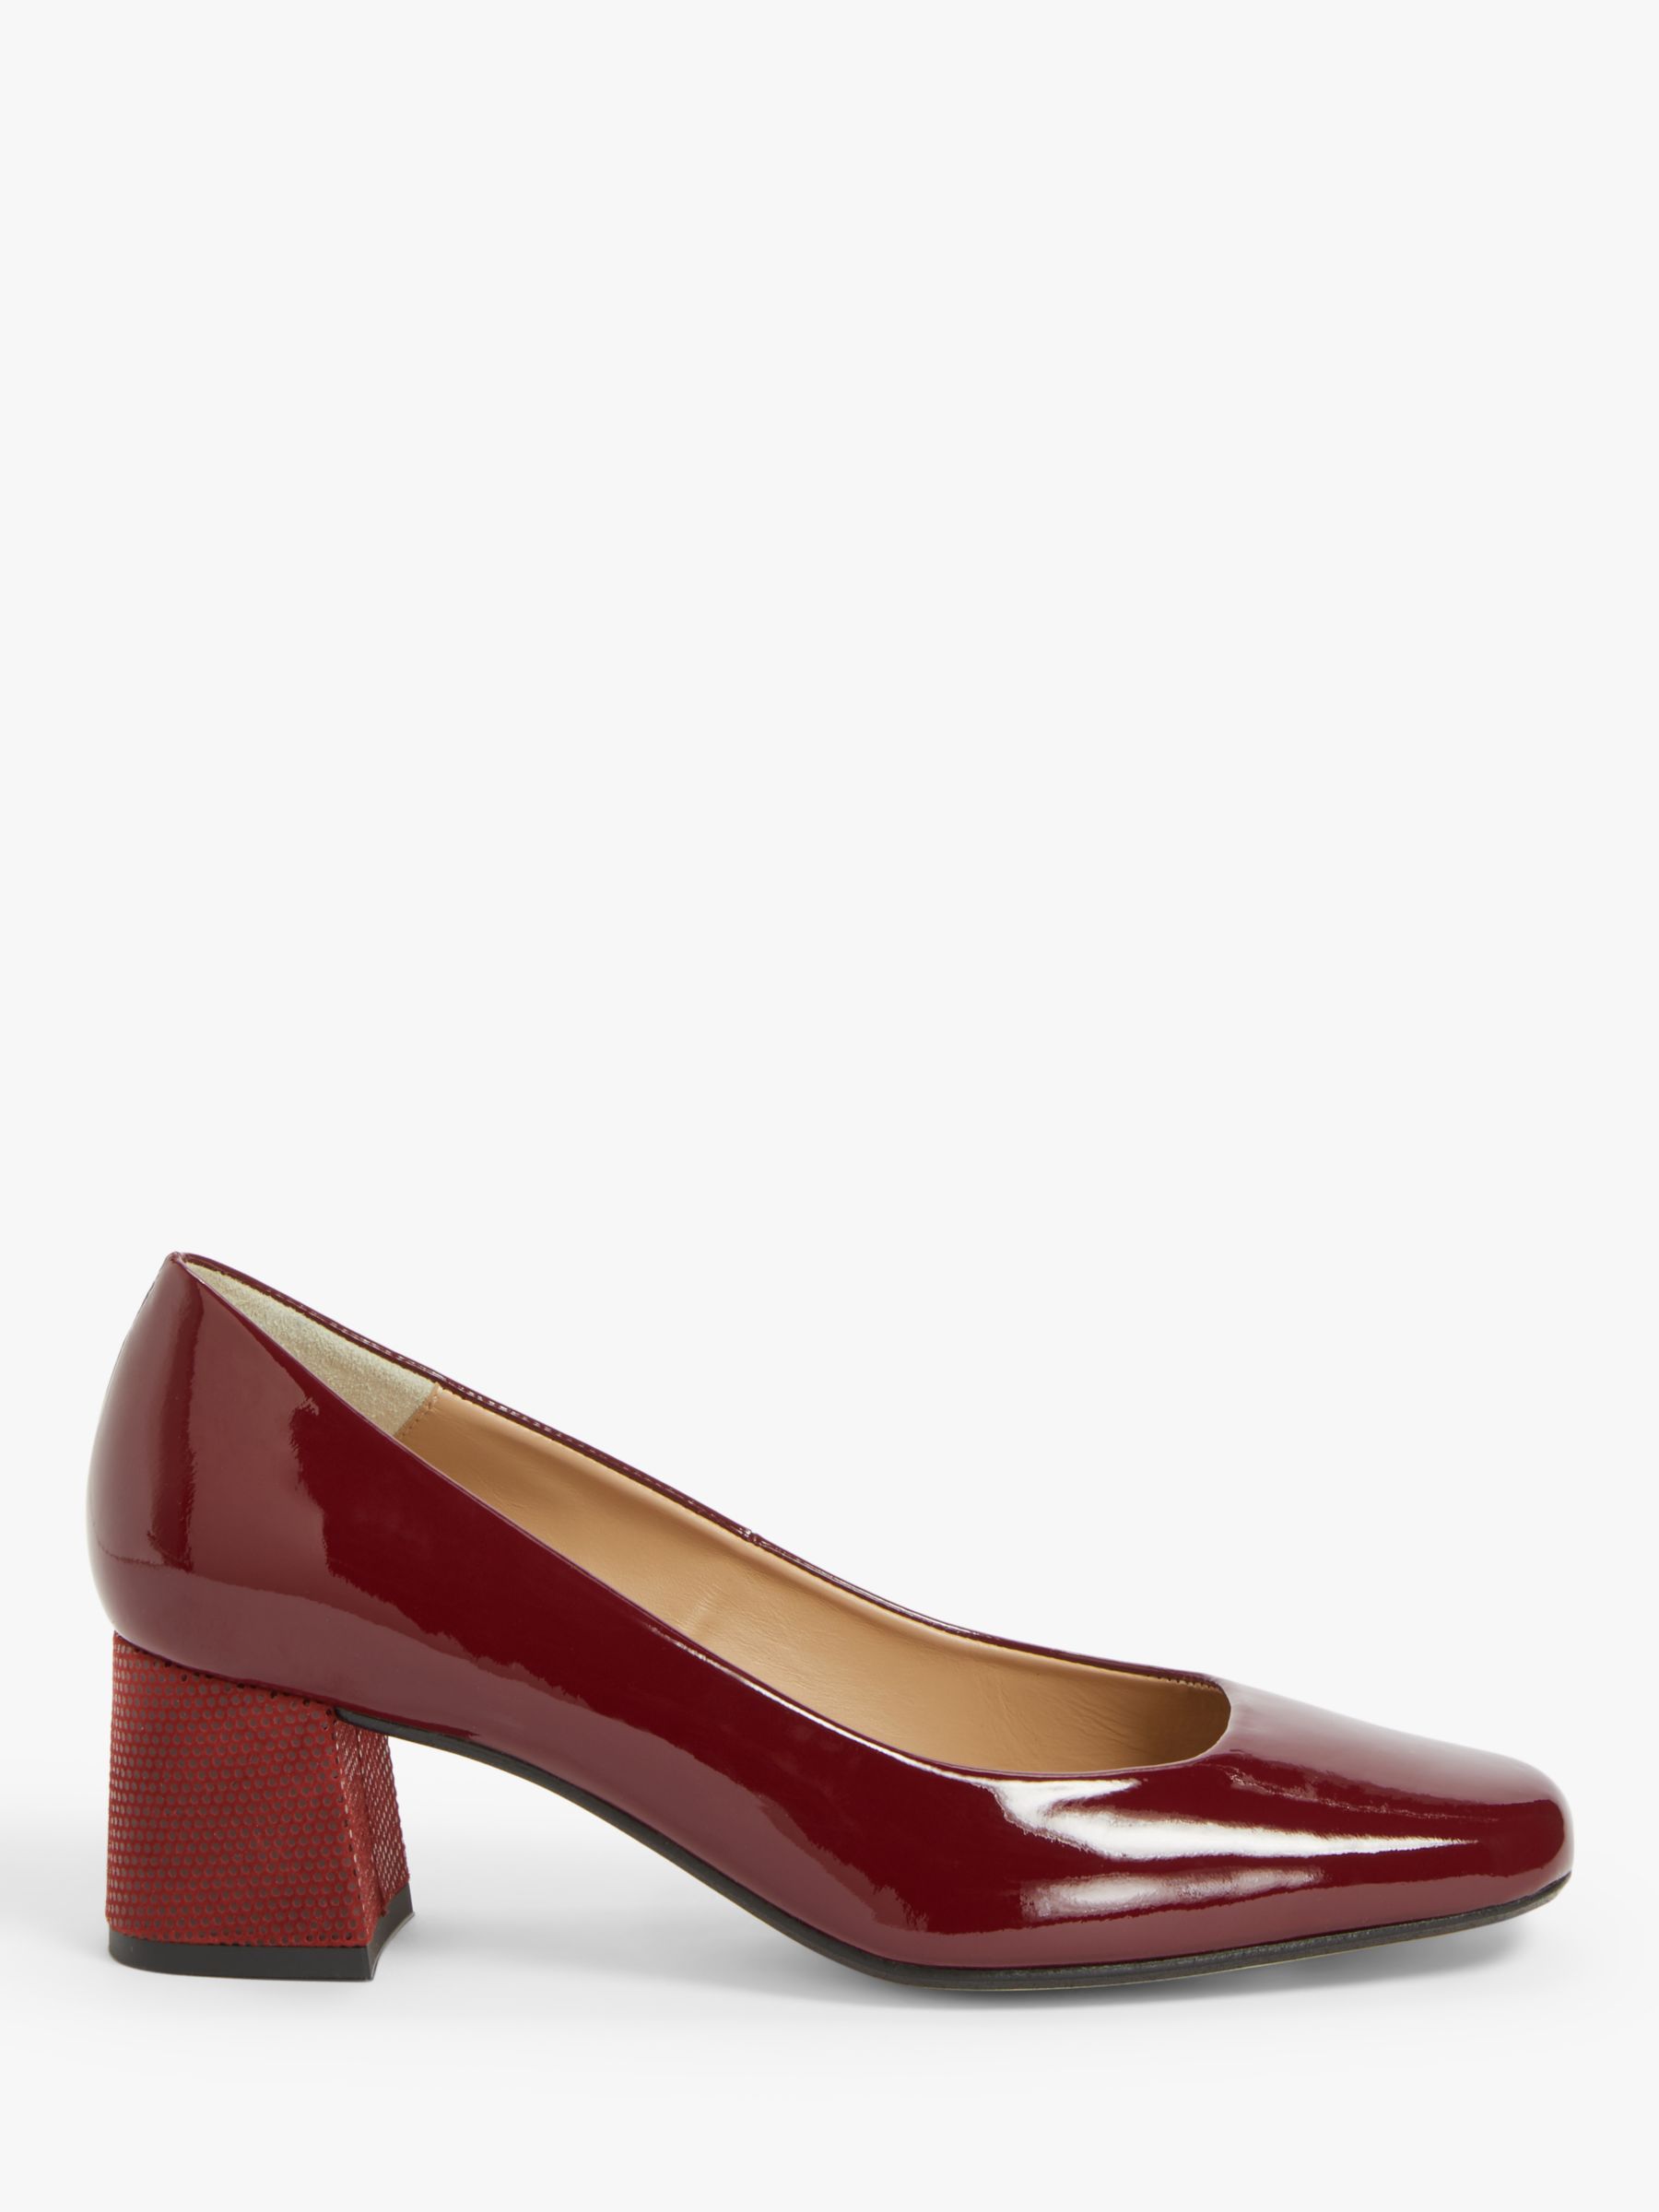 John Lewis & Partners Amanda Patent Leather Court Shoes, Red